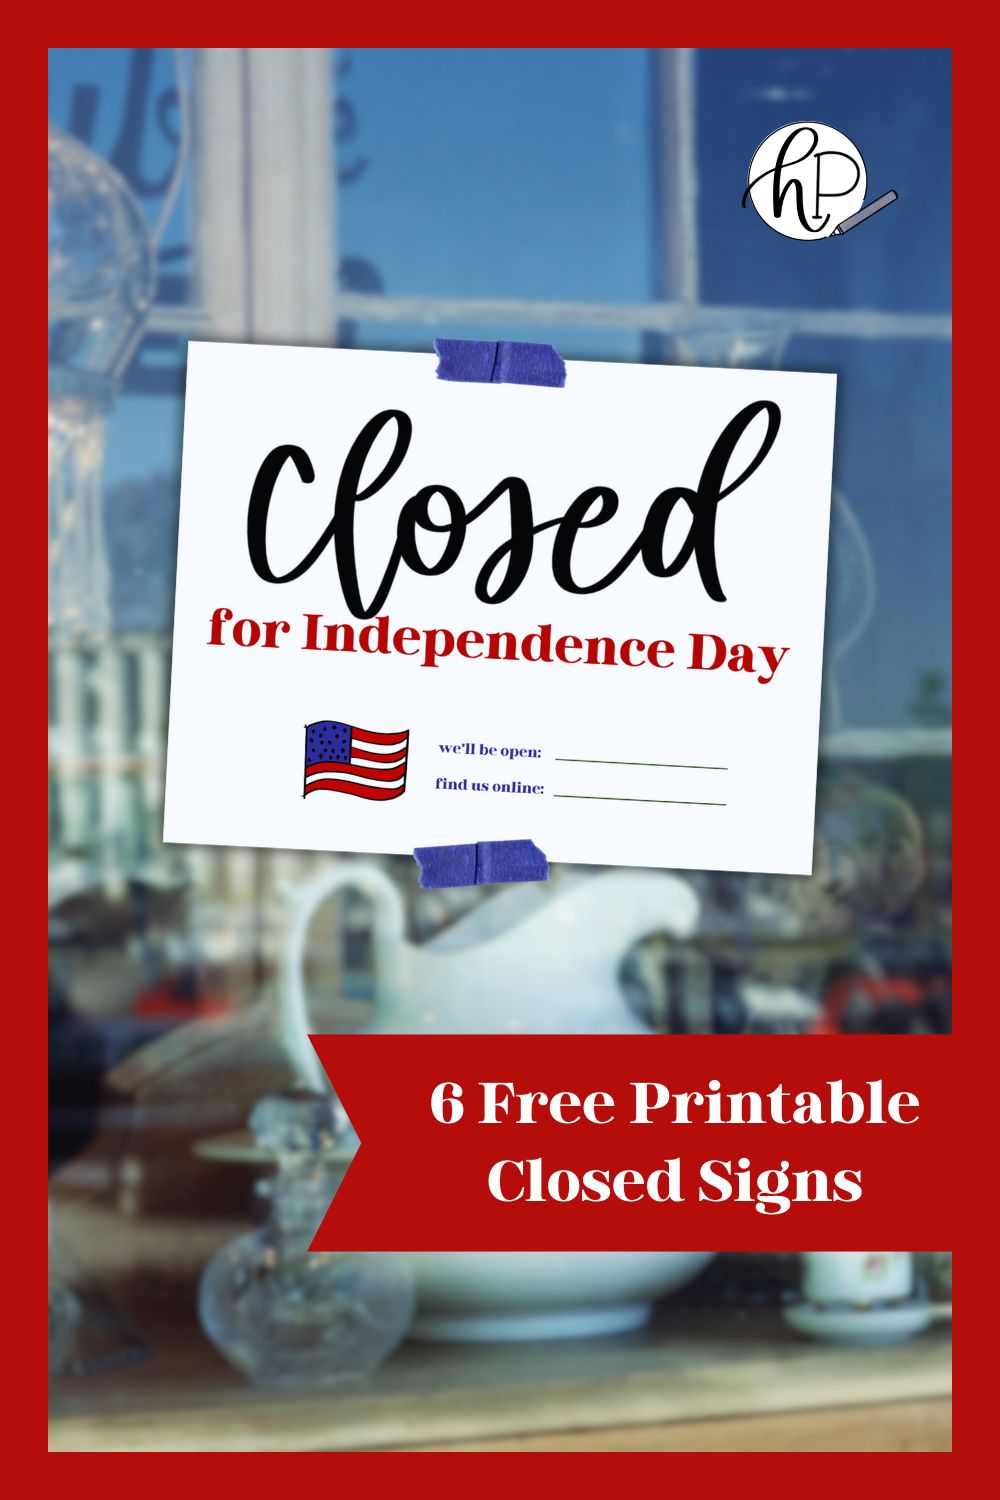 Closed for Independence Day sign shown printed and taped to store window sign has hand lettering, clear typography and a hand illustrated USA flag with room for holiday hours and social media tag or website. Sign reads closed for independence day text over reads: 6 free printable closed signs